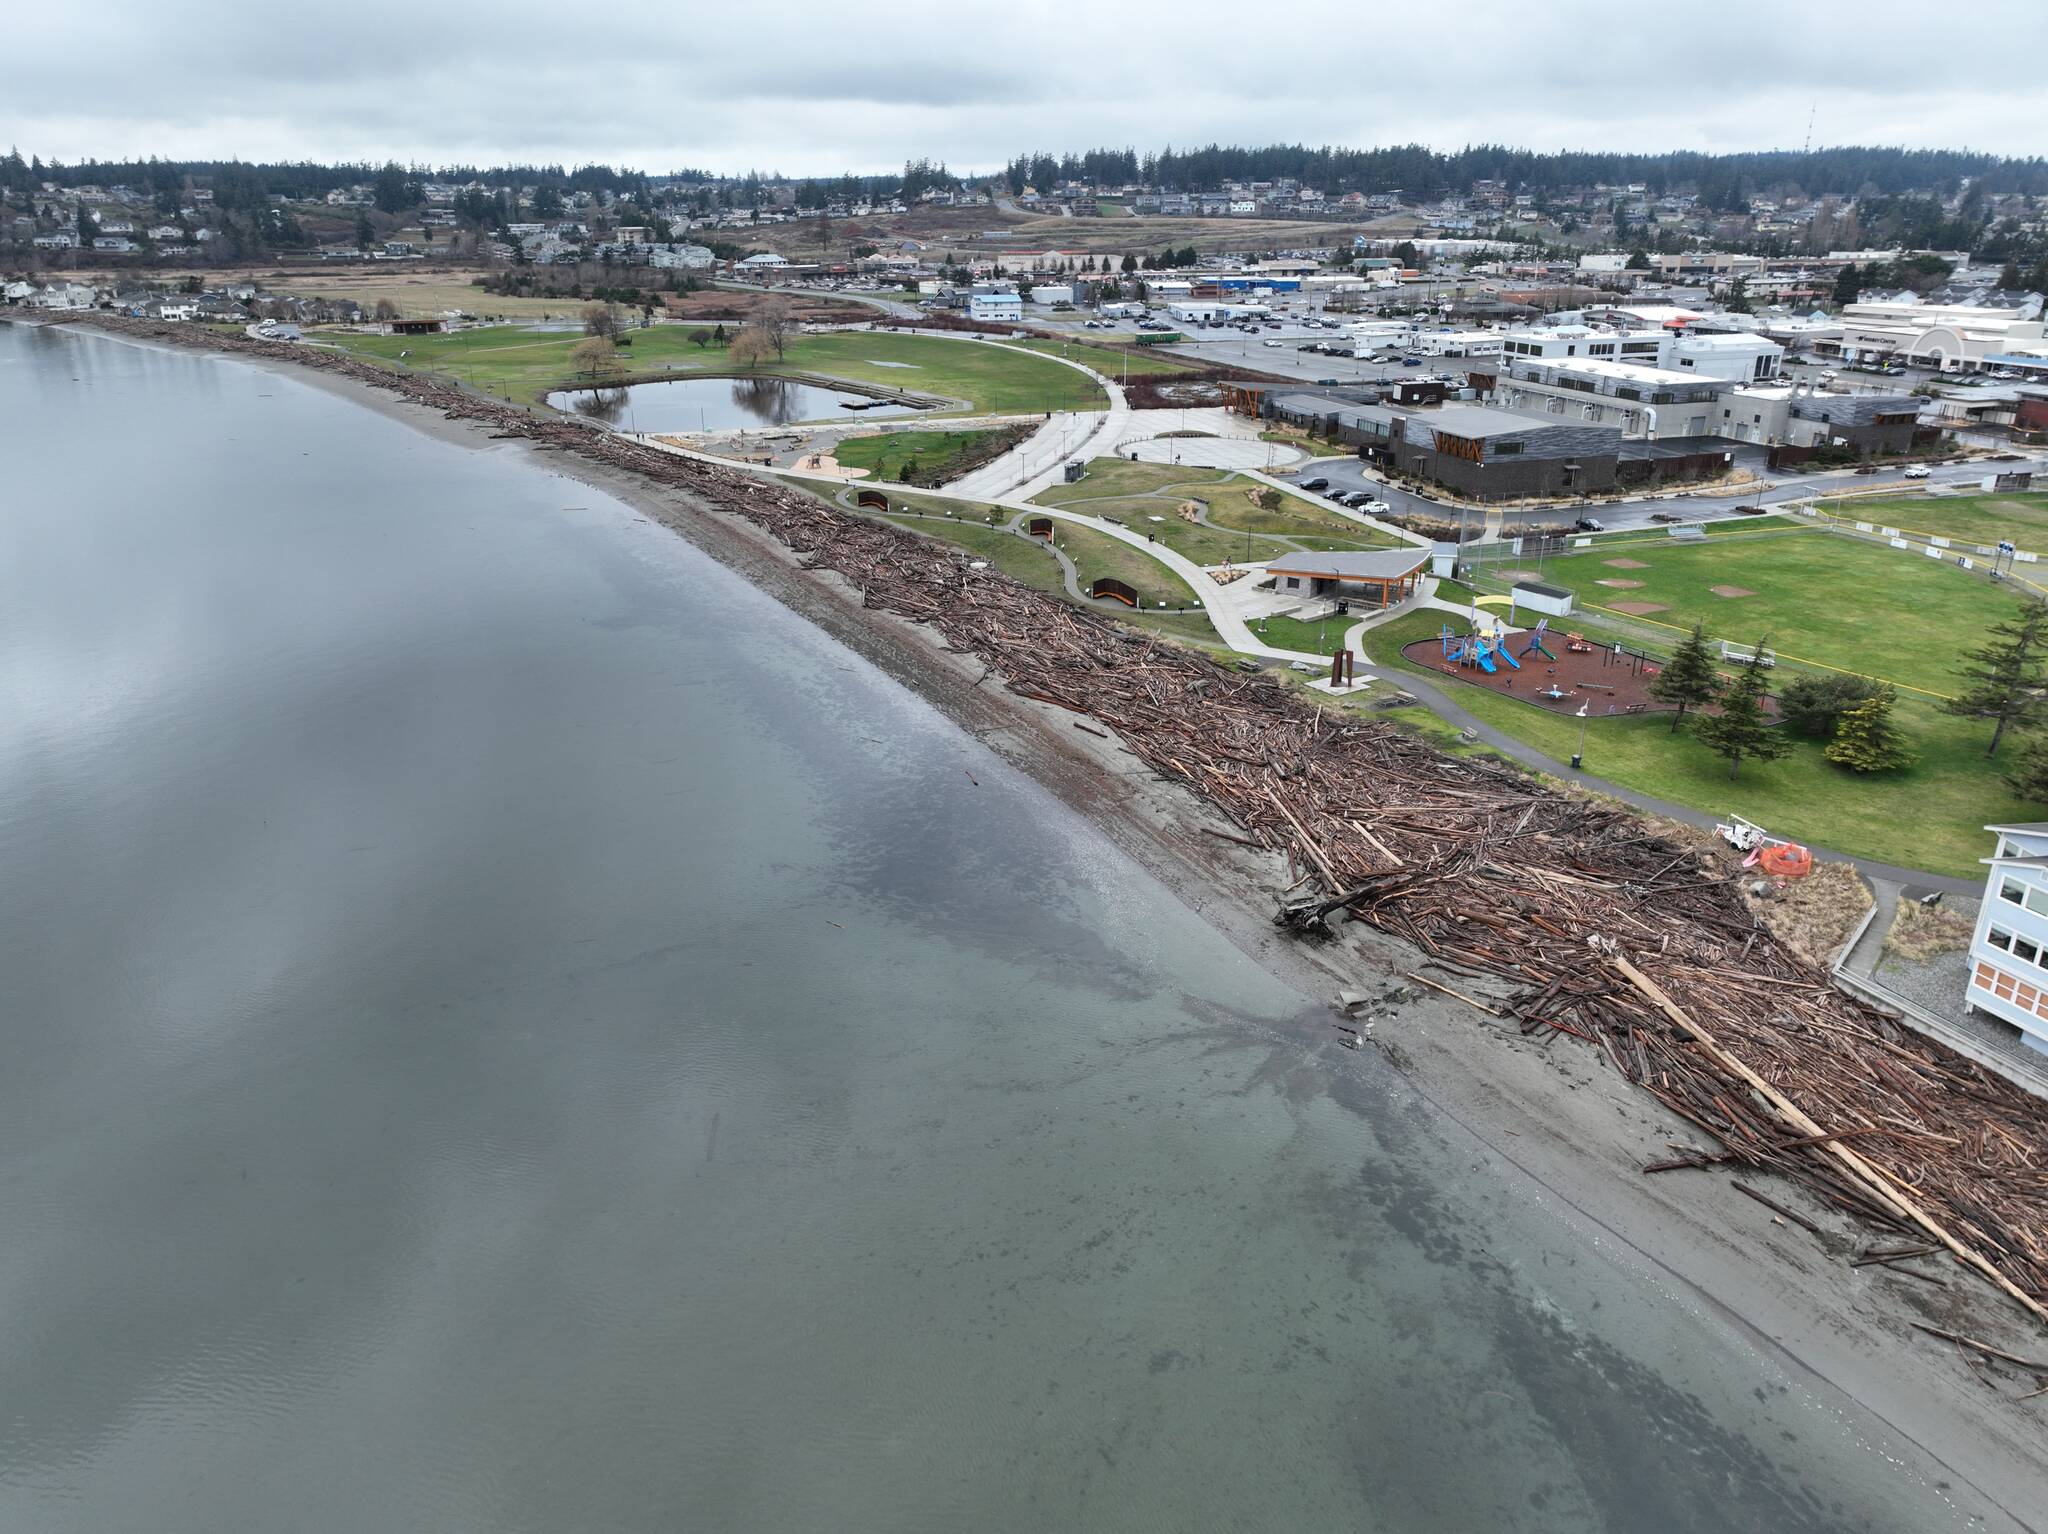 City of Oak Harbor photo
Oak Harbor beaches were inundated with driftwood during recent king tide events.